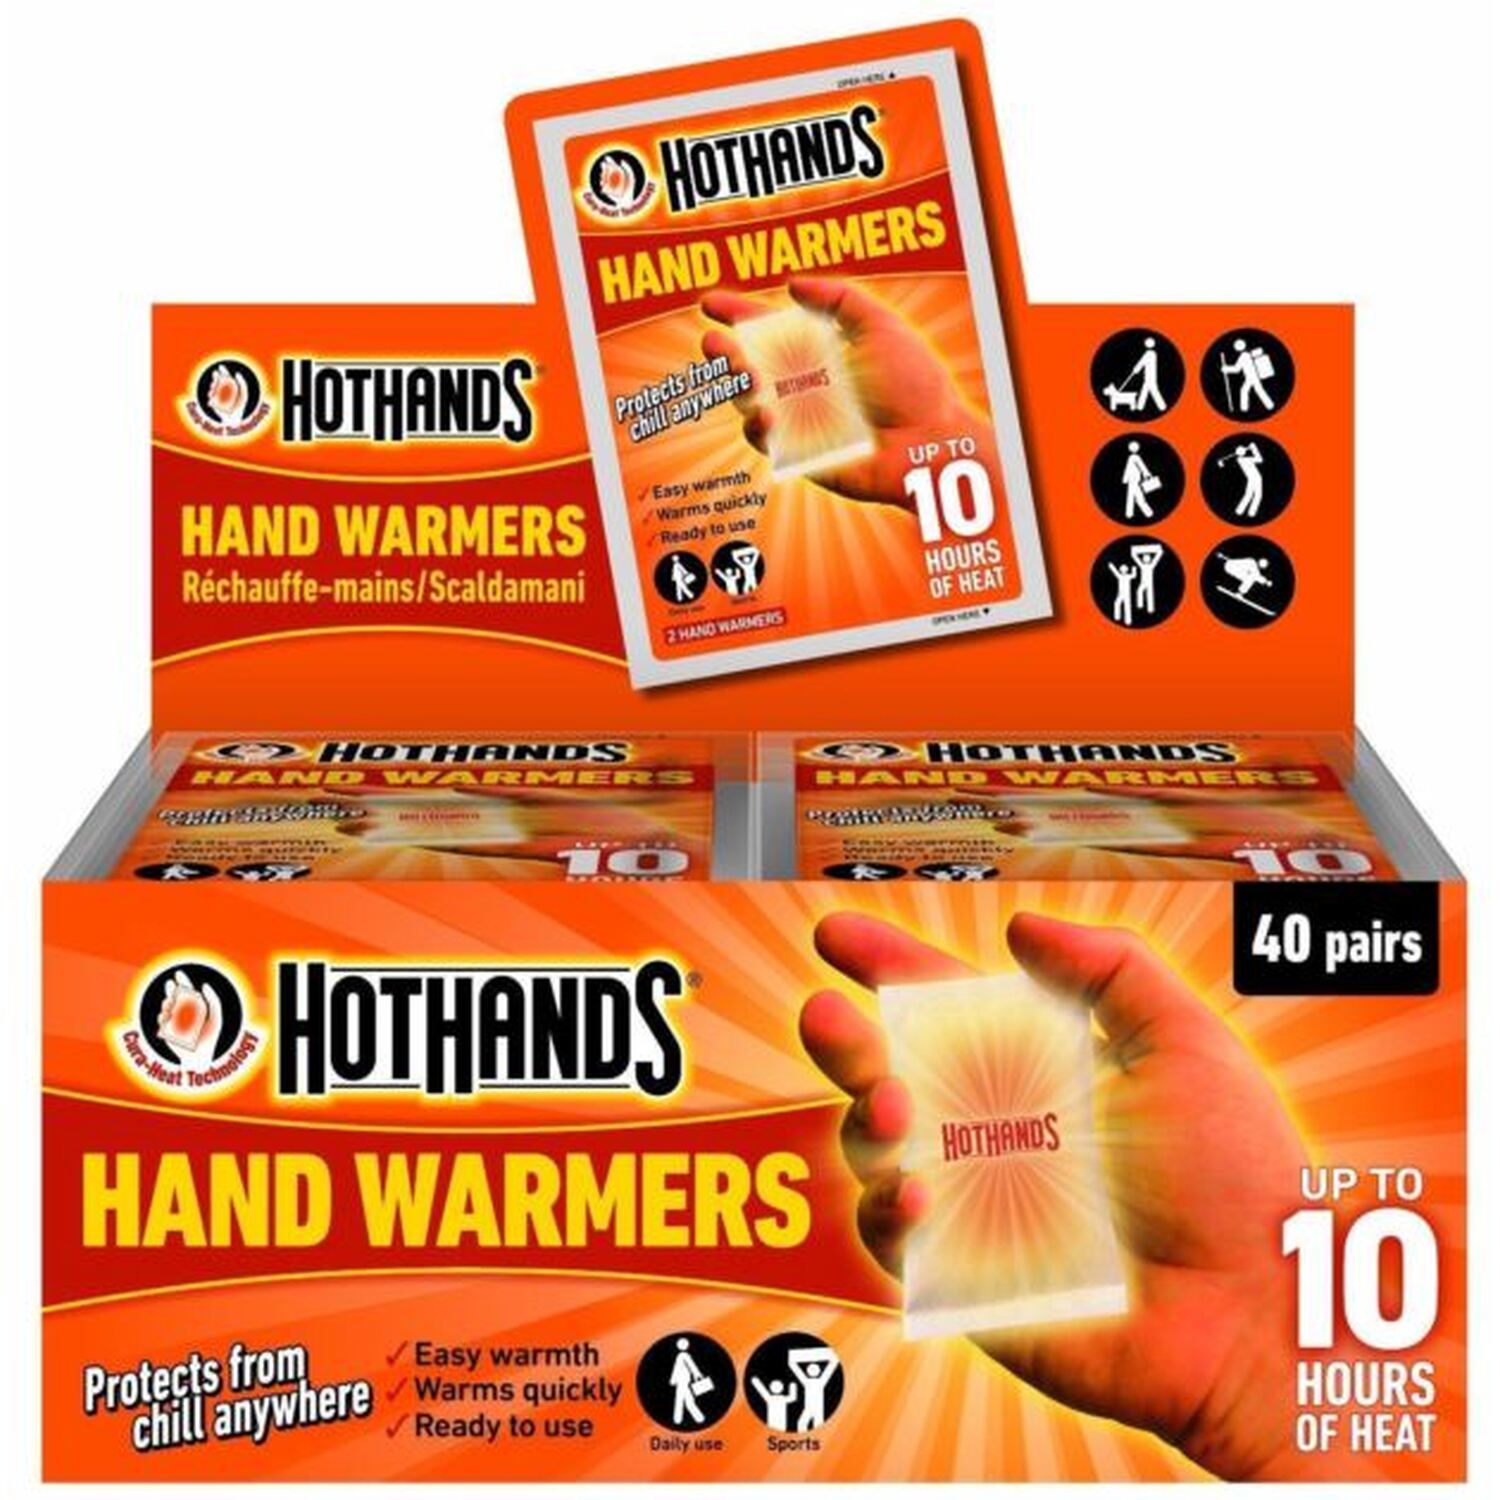 HotHands Hand Warmer Image 1